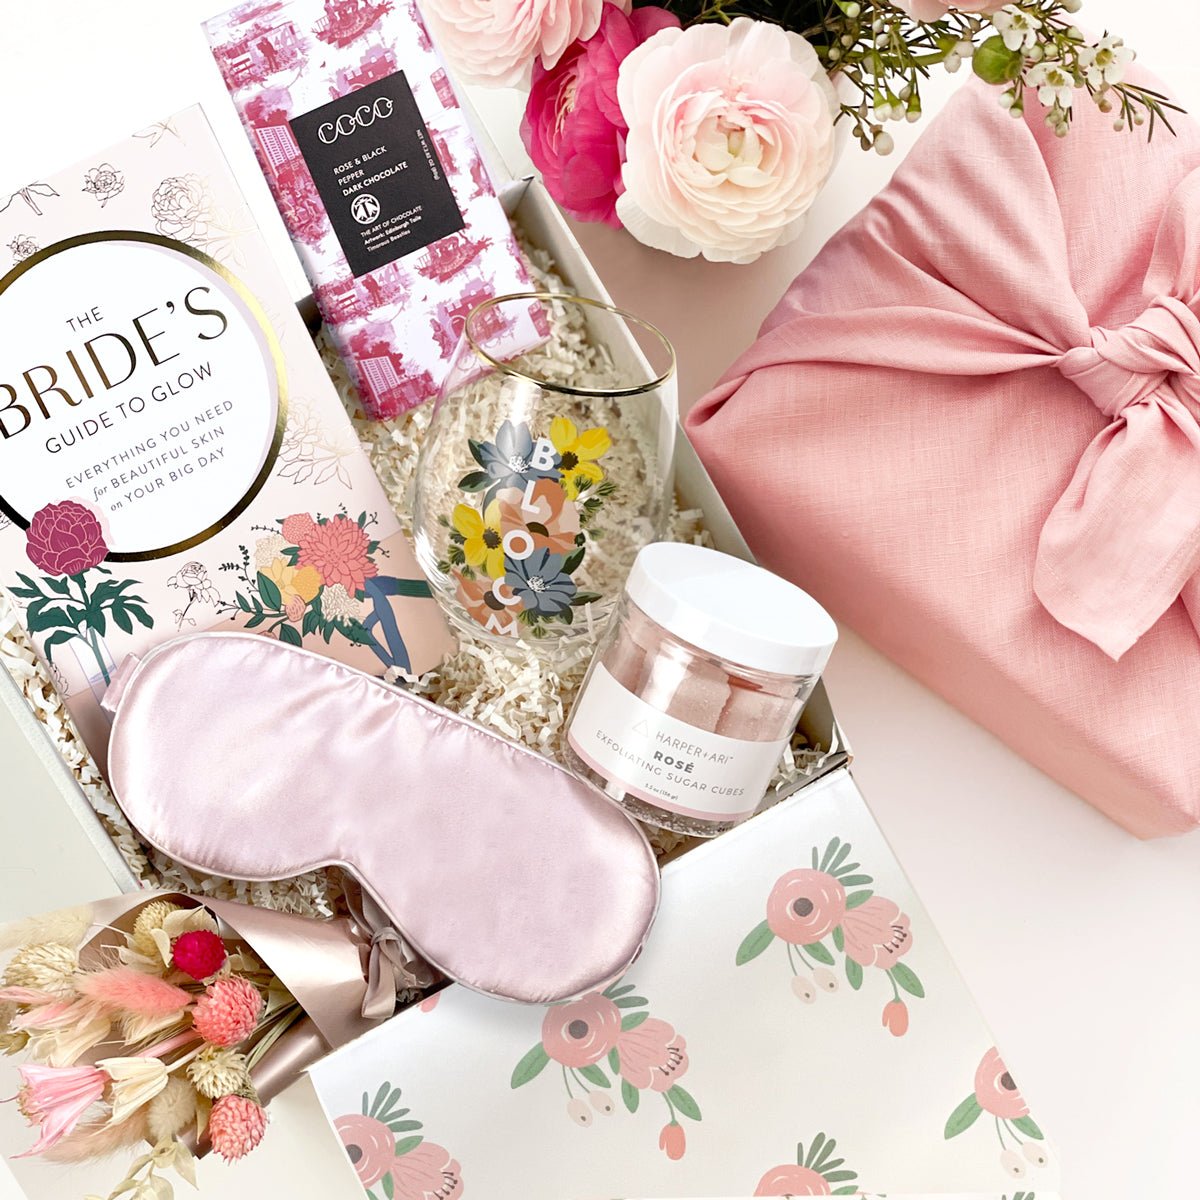 Bride to Be curated gift box, perfect for wedding party and bridal gift. Contain Bride&#39;s guide to glow, coco rose chocolate and more.